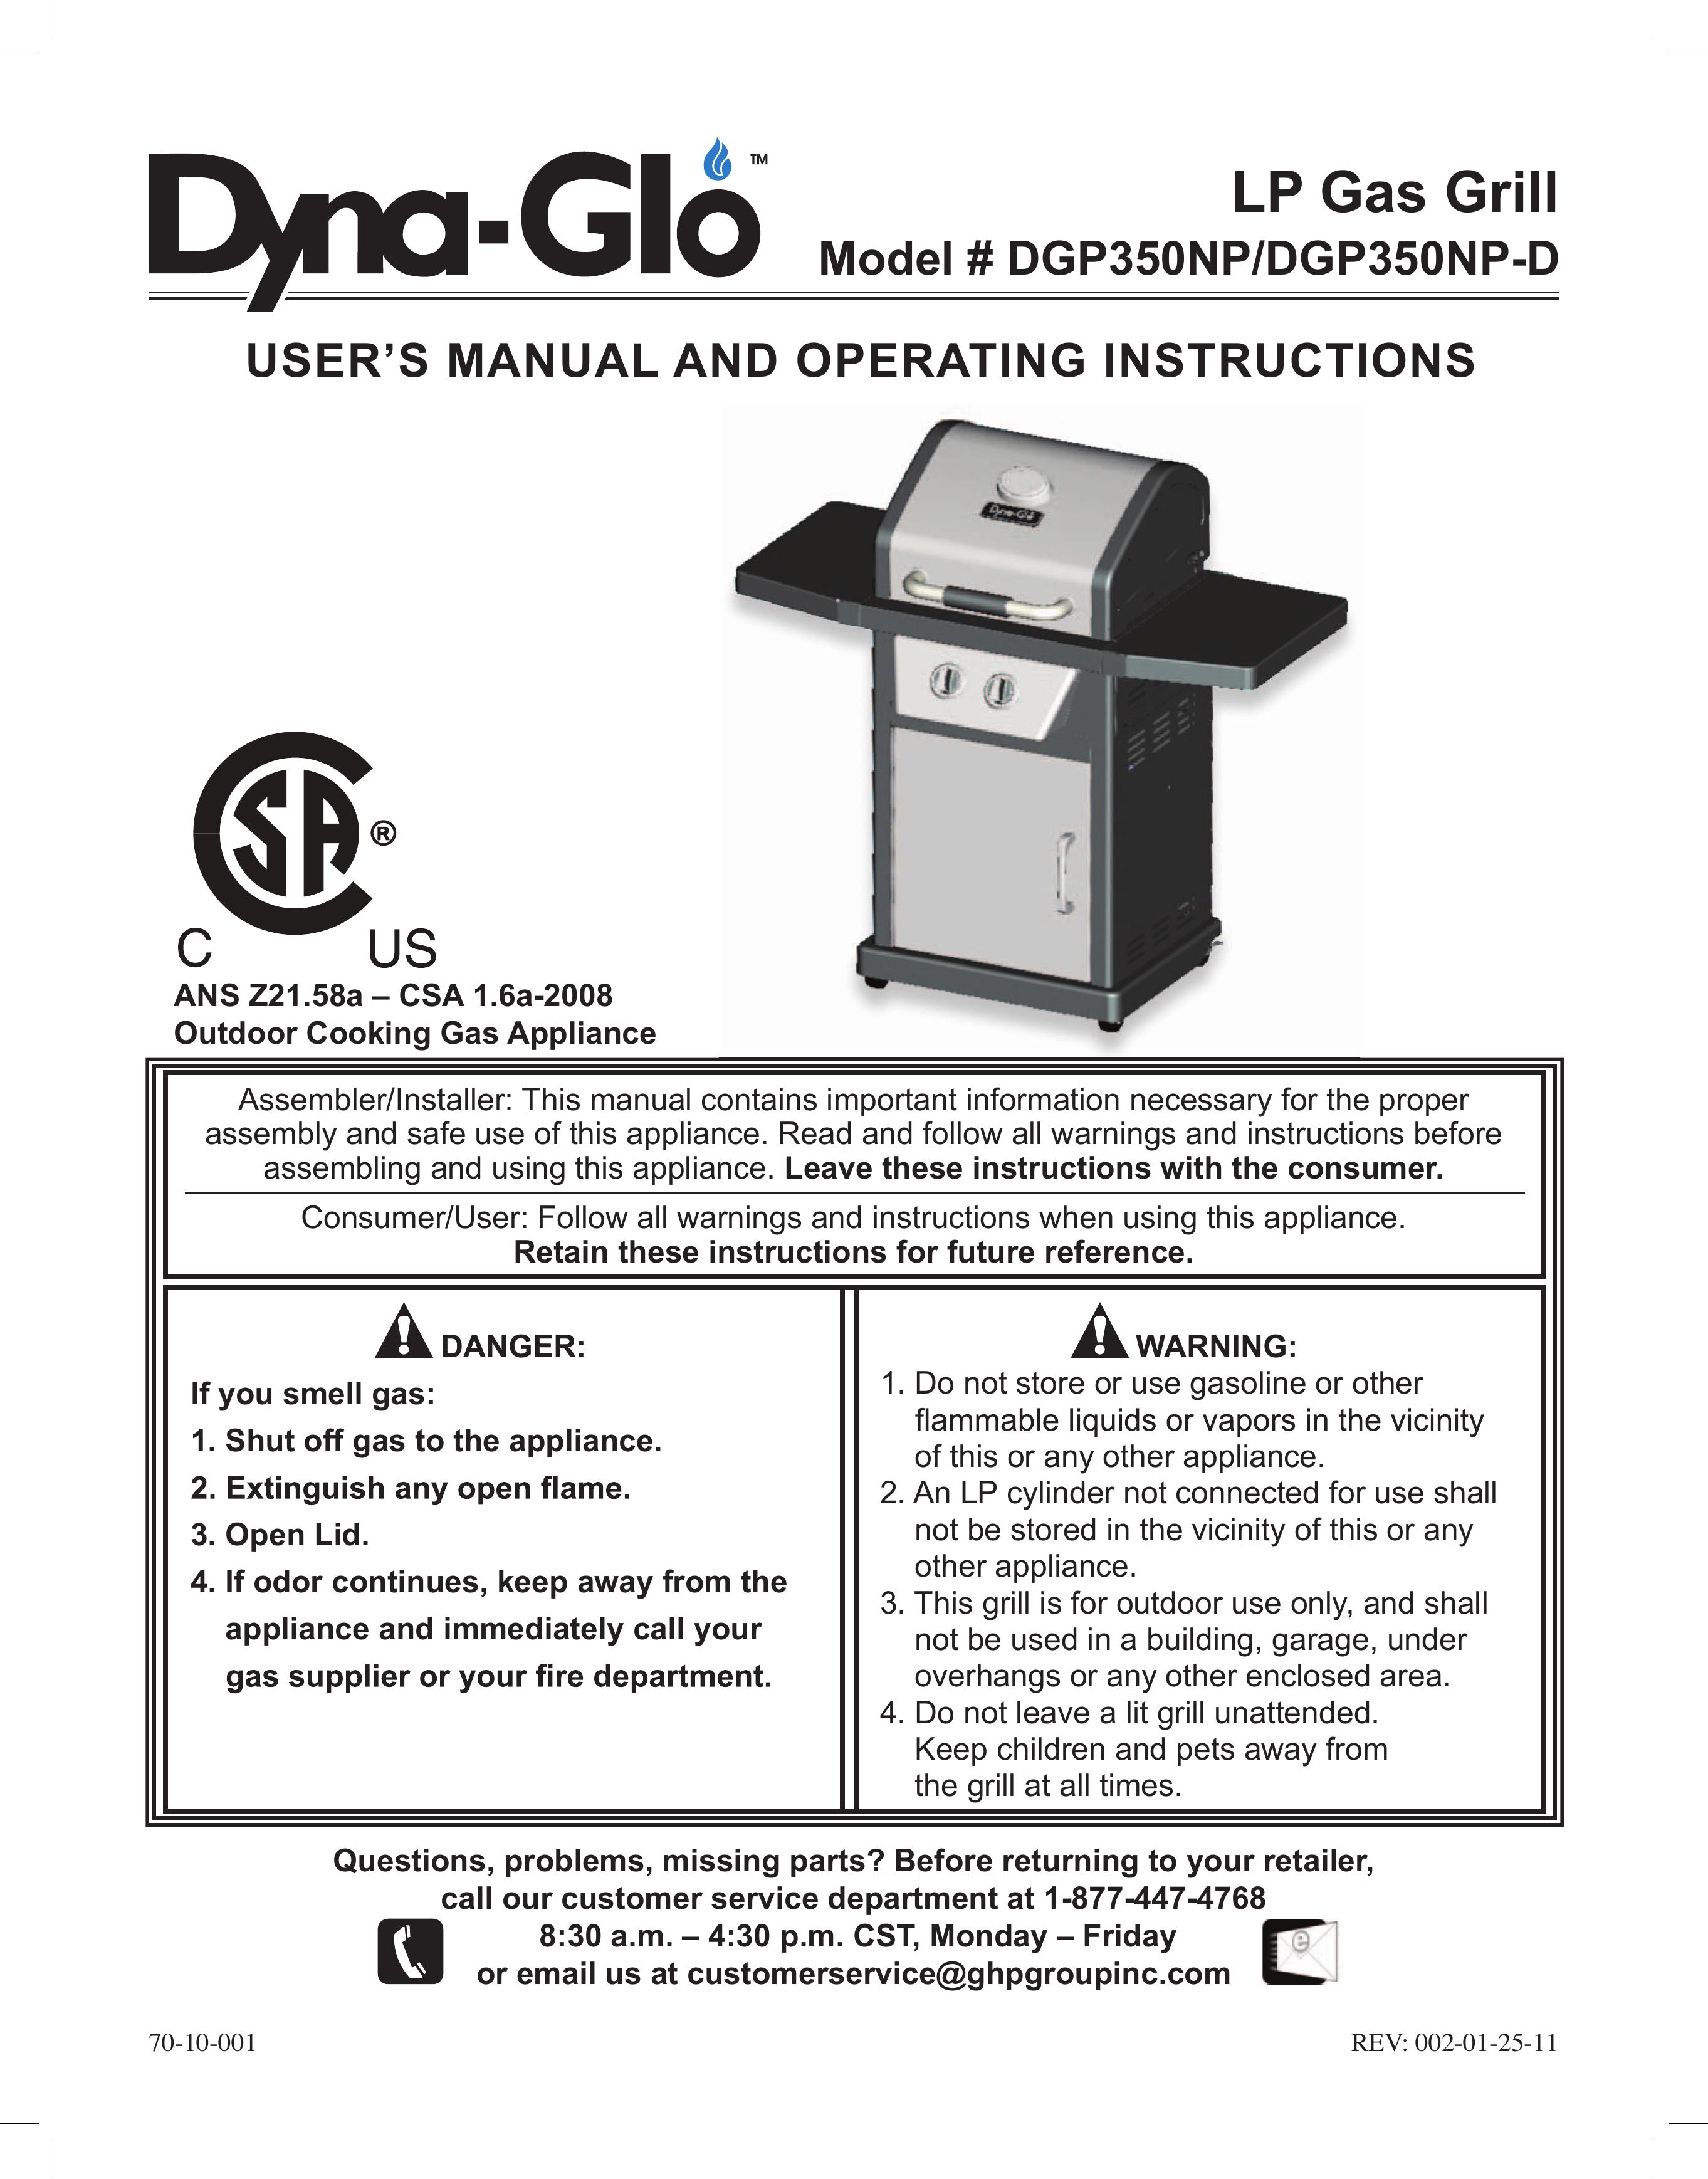 Dyna-Glo DGP350NP Gas Grill User Manual